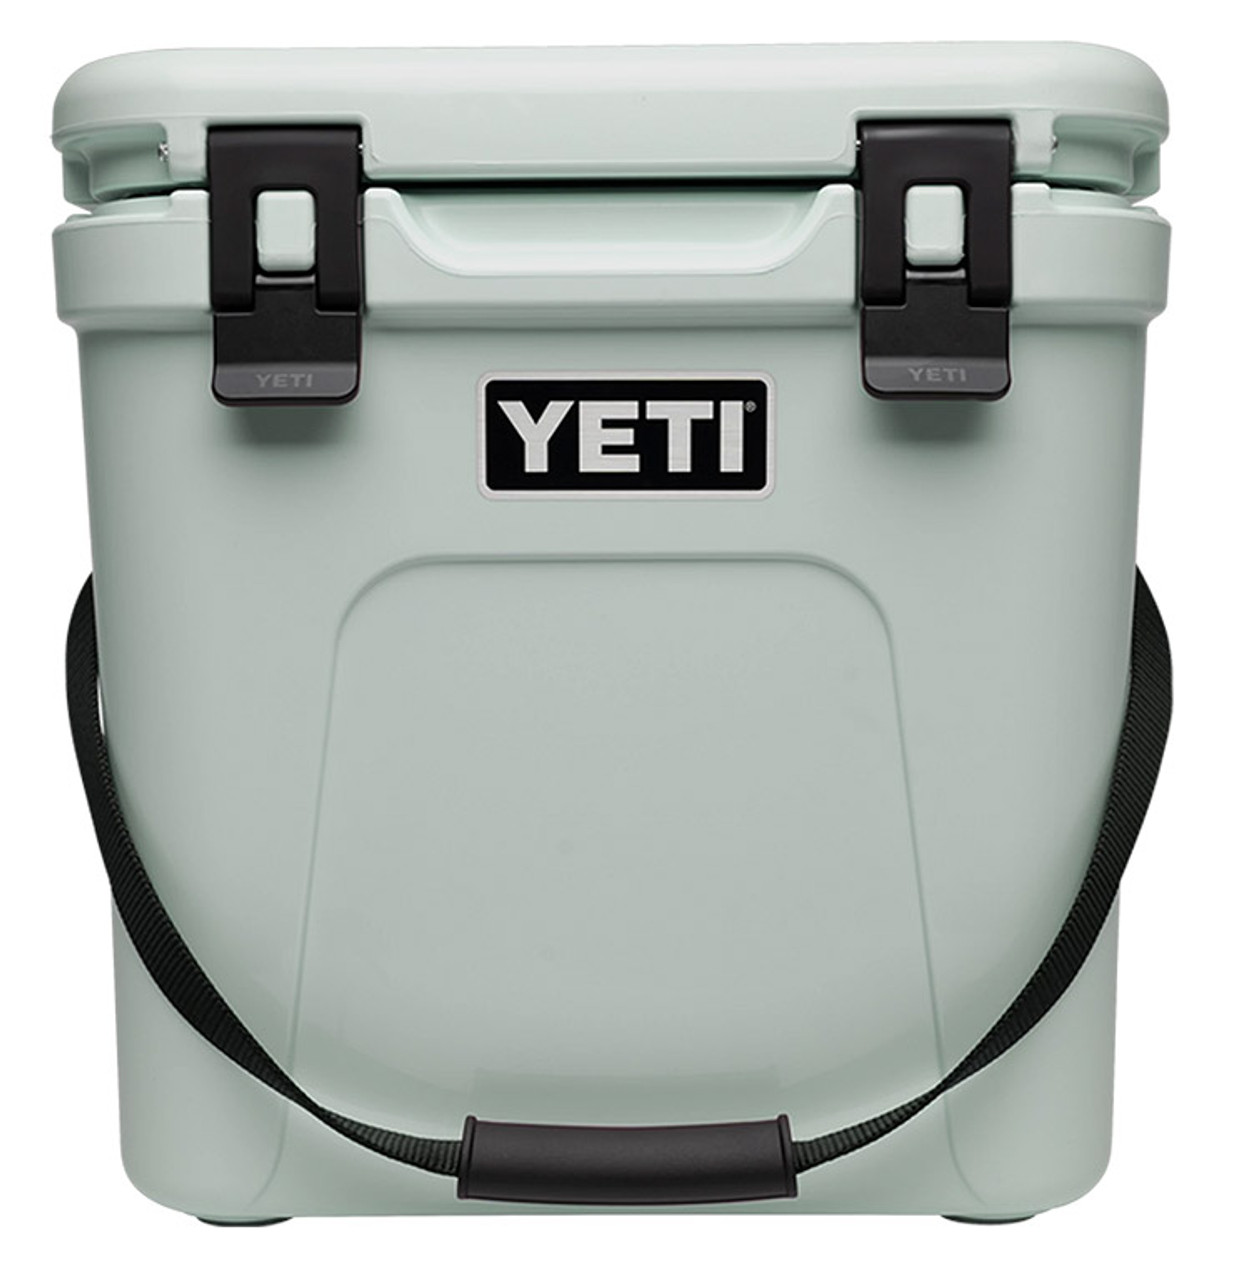 YETI - You asked, you got it. Sagebrush Green is now available in